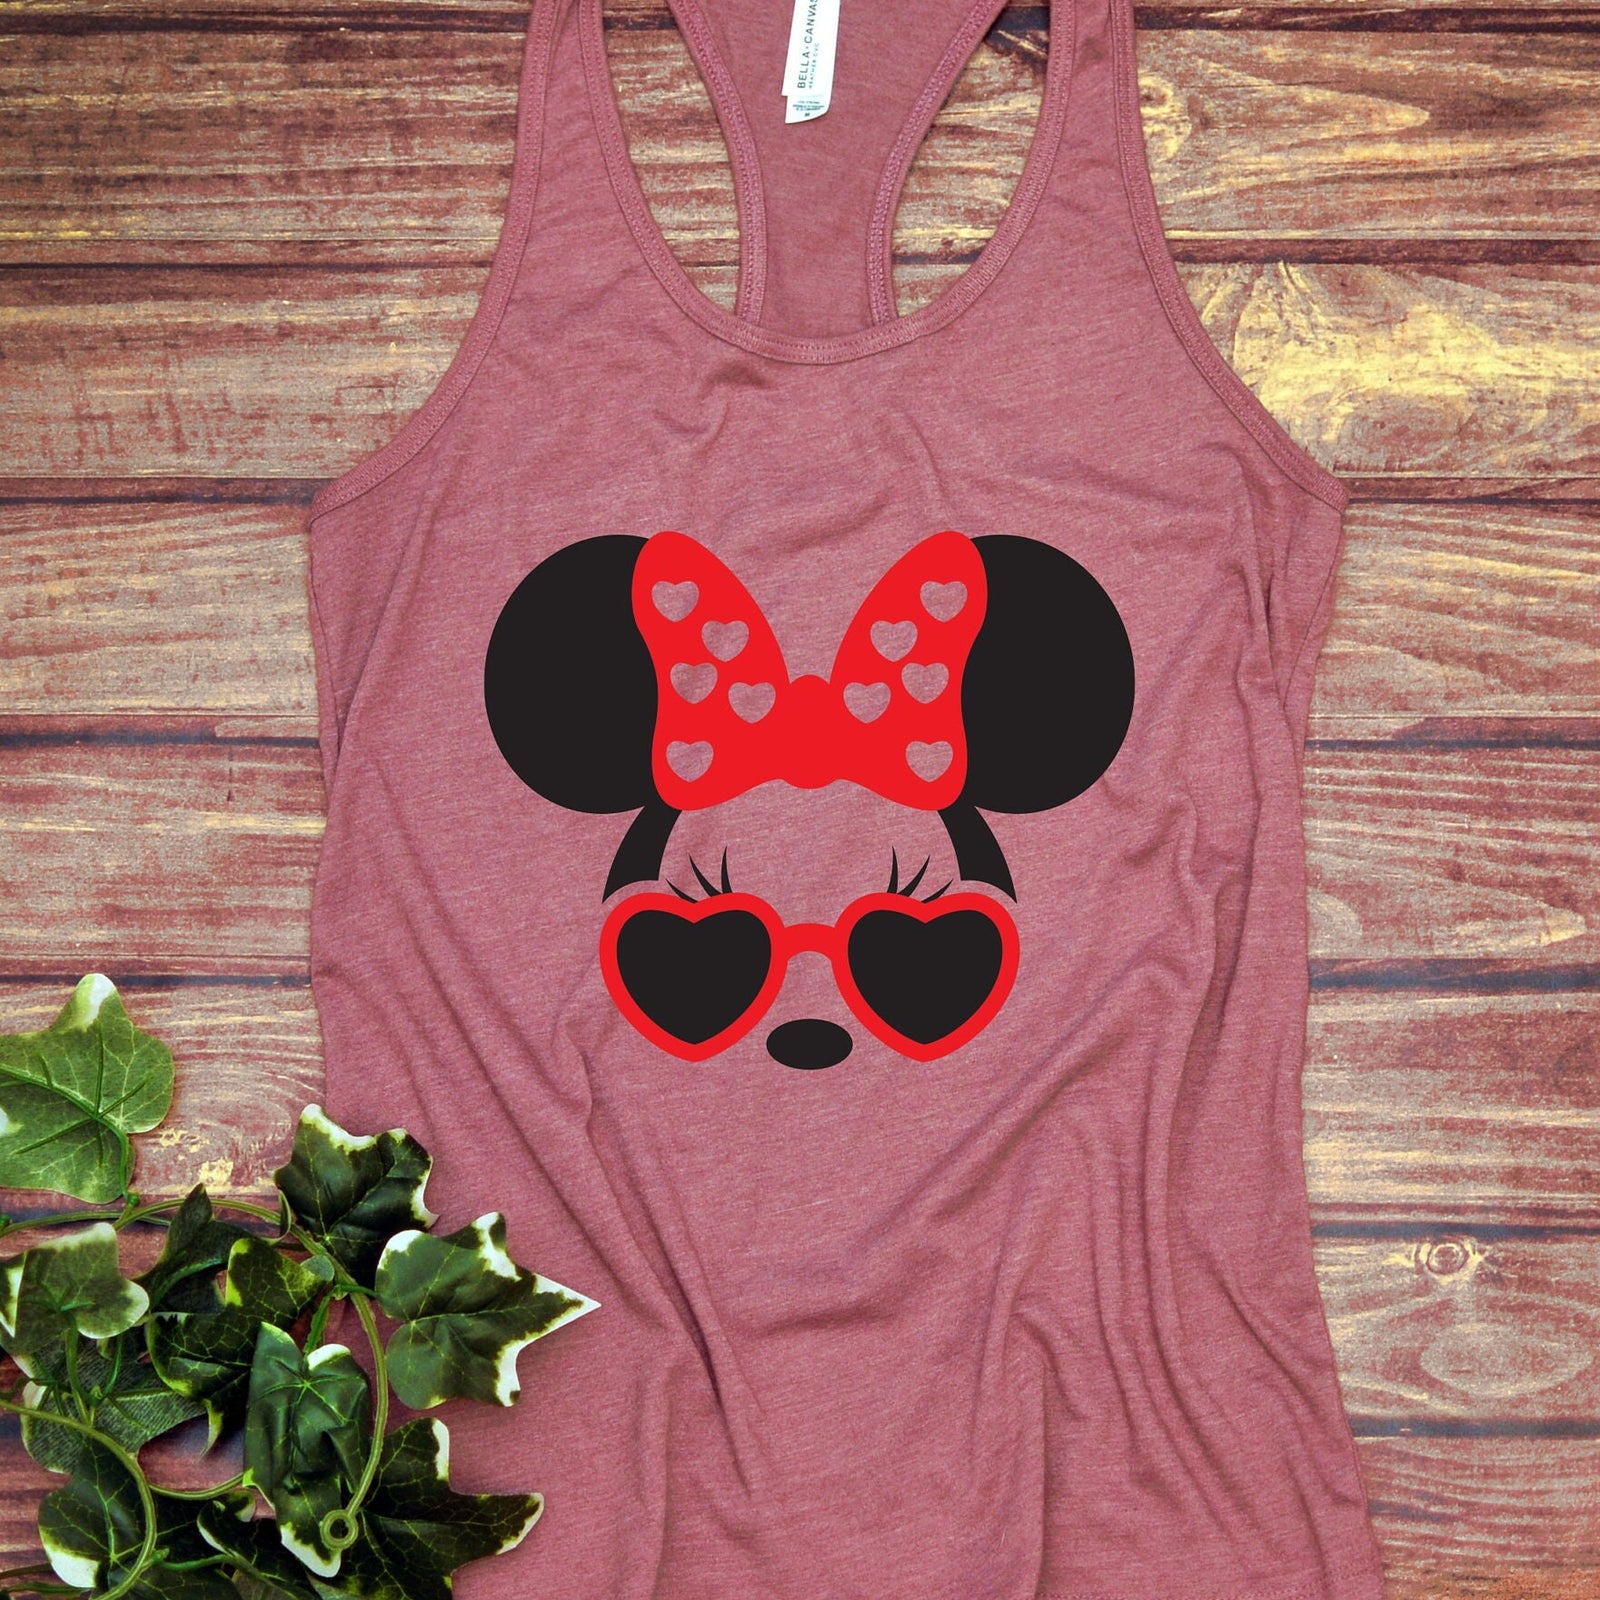 Minnie Mouse Ladies Racer Back Tank Top- Heart Sunglasses - Red Bow